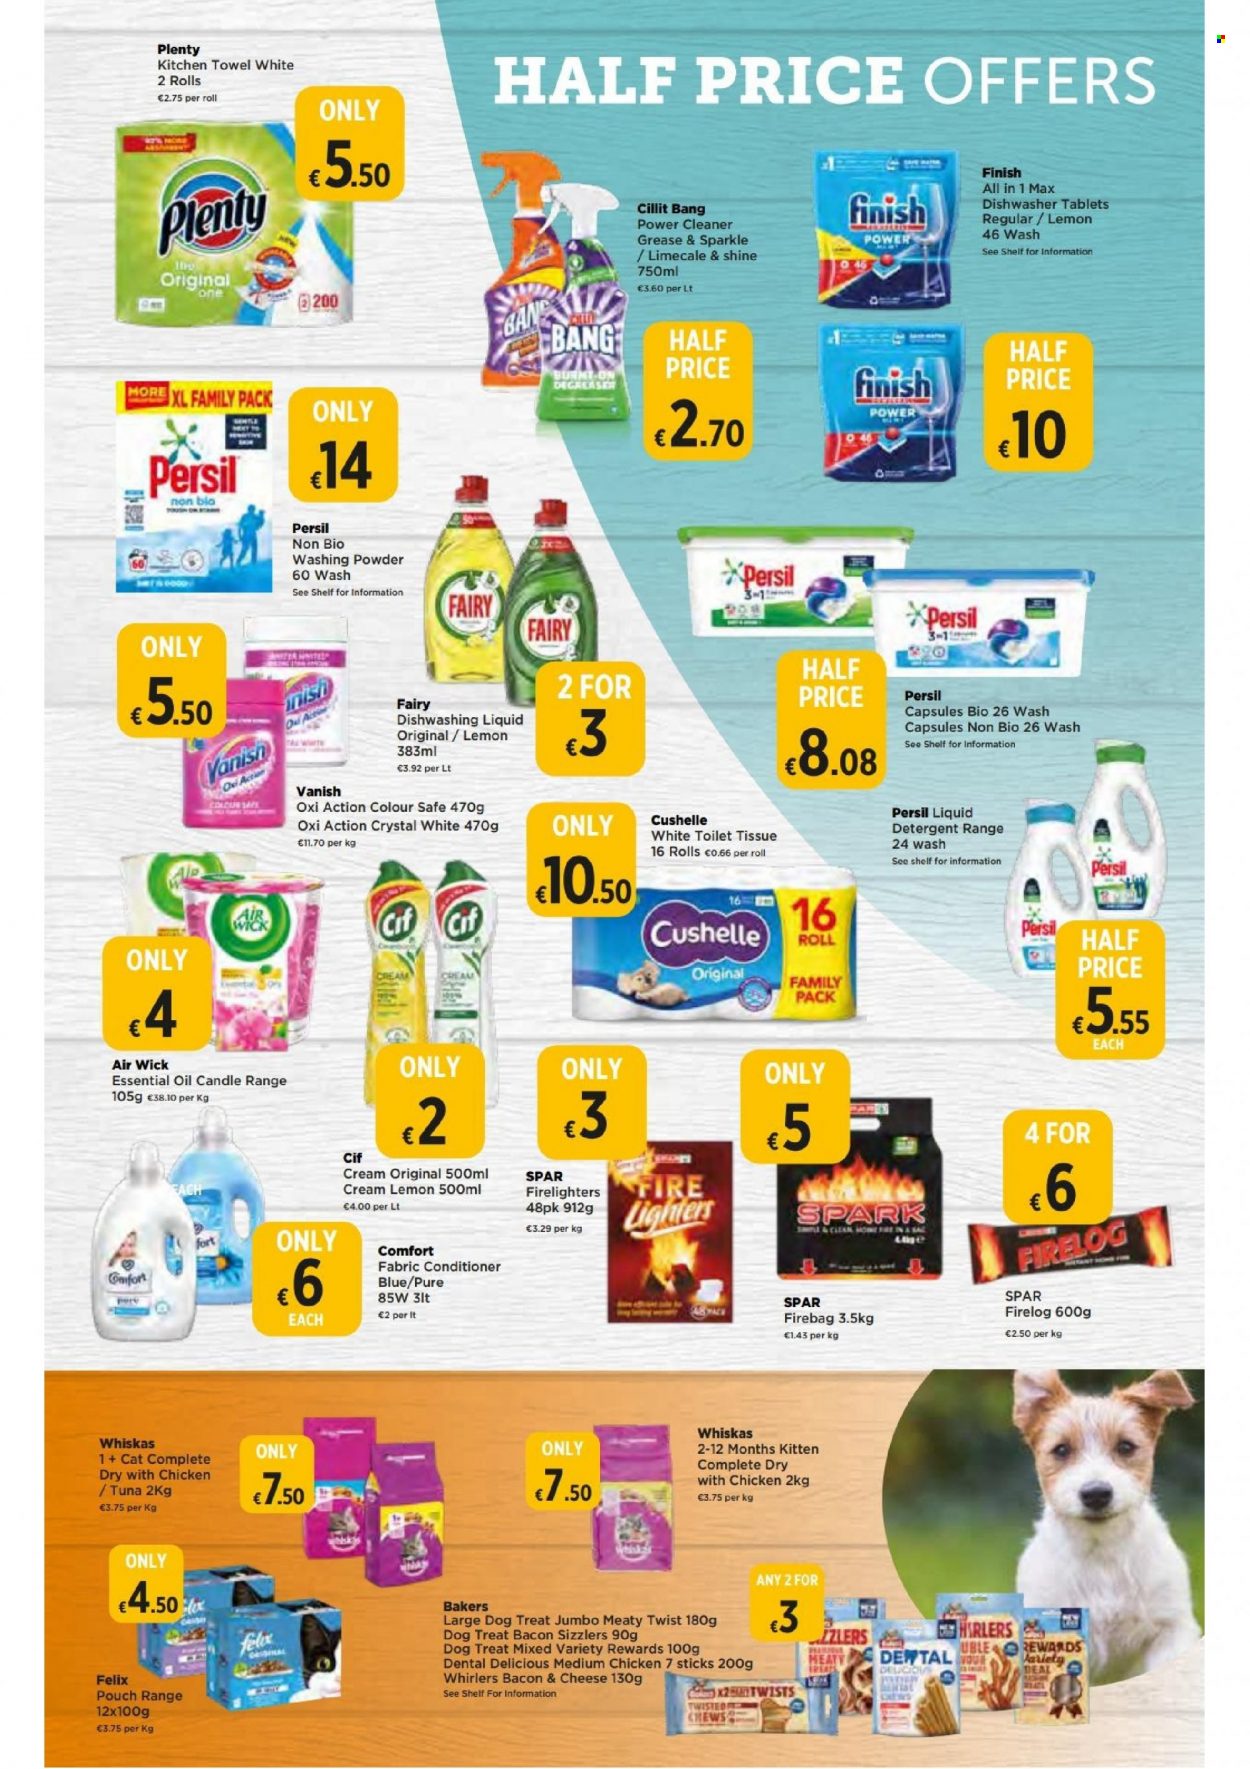 thumbnail - EUROSPAR offer  - 01.12.2022 - 28.12.2022 - Sales products - tuna, bacon, chewing gum, toilet paper, Plenty, kitchen towels, Cushelle, detergent, cleaner, Fairy, Cif, Vanish, Persil, liquid detergent, laundry powder, Comfort softener, dishwashing liquid, dishwasher cleaner, dishwasher tablets, firelighter, candle, Air Wick, Whiskas, Felix, Bakers. Page 19.